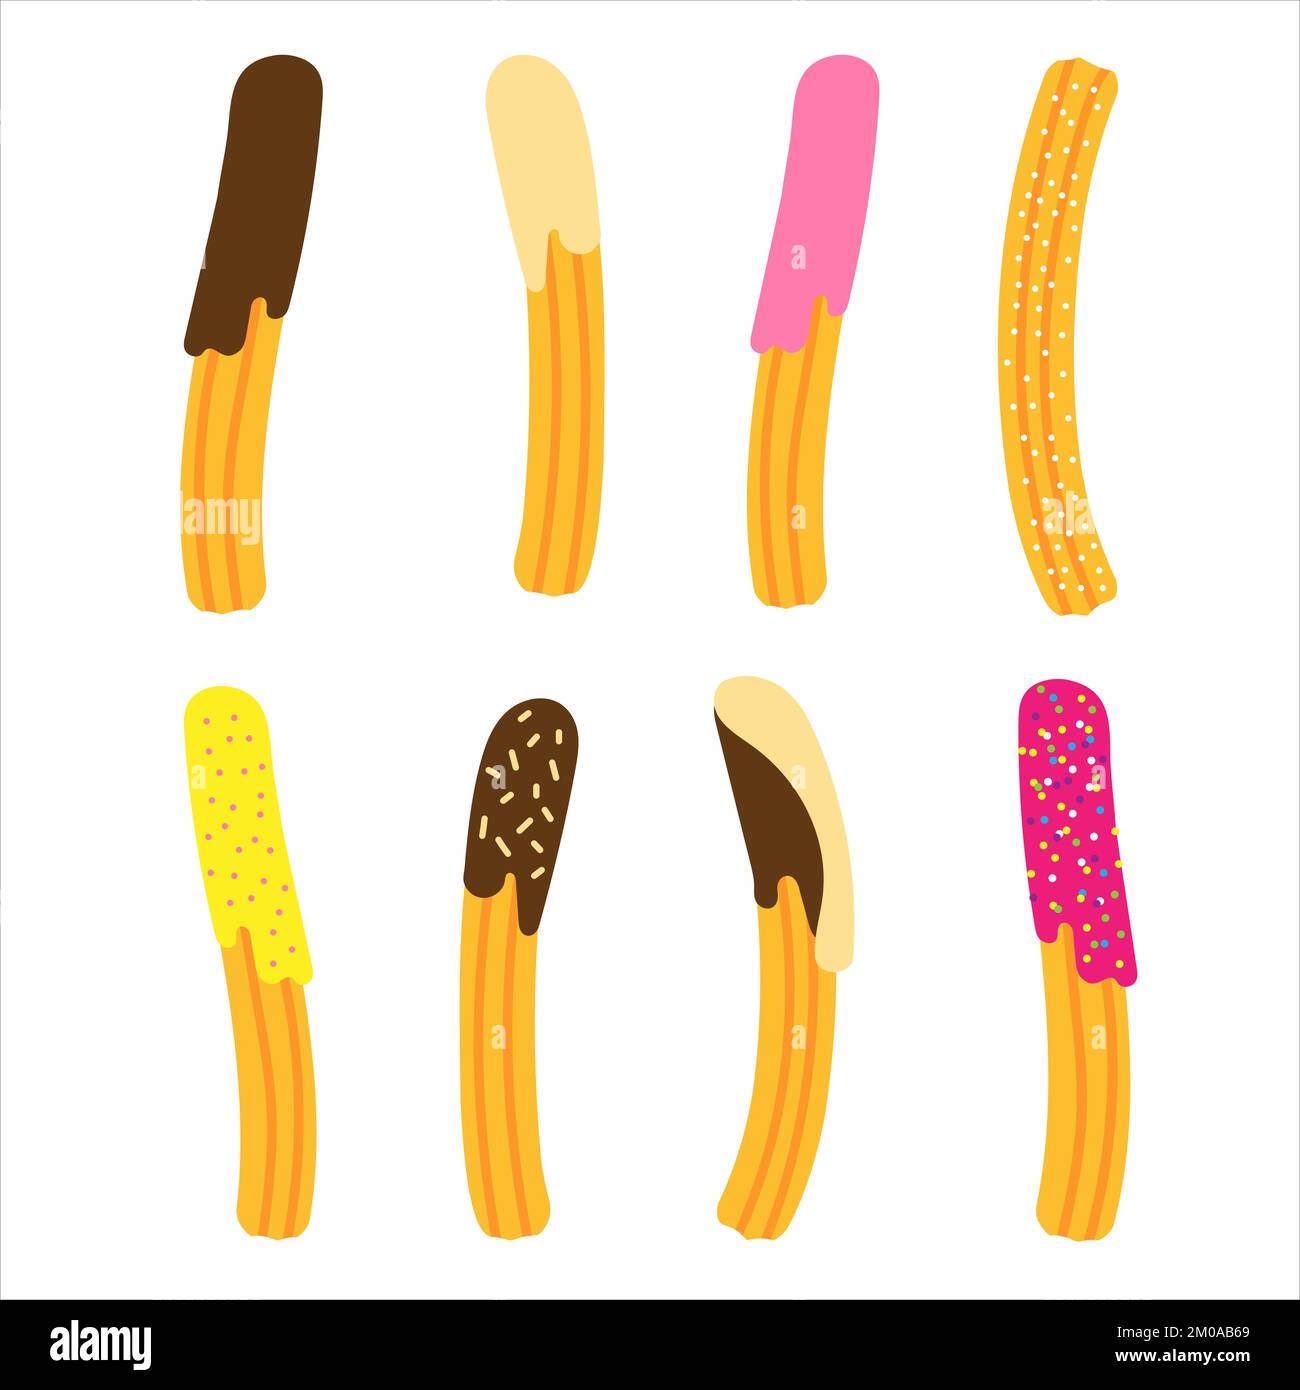 Set of churros with different toppings. Mexican snack. Hand drawn vector illustration. Churros sticks, different shapes on white. Stock Vector